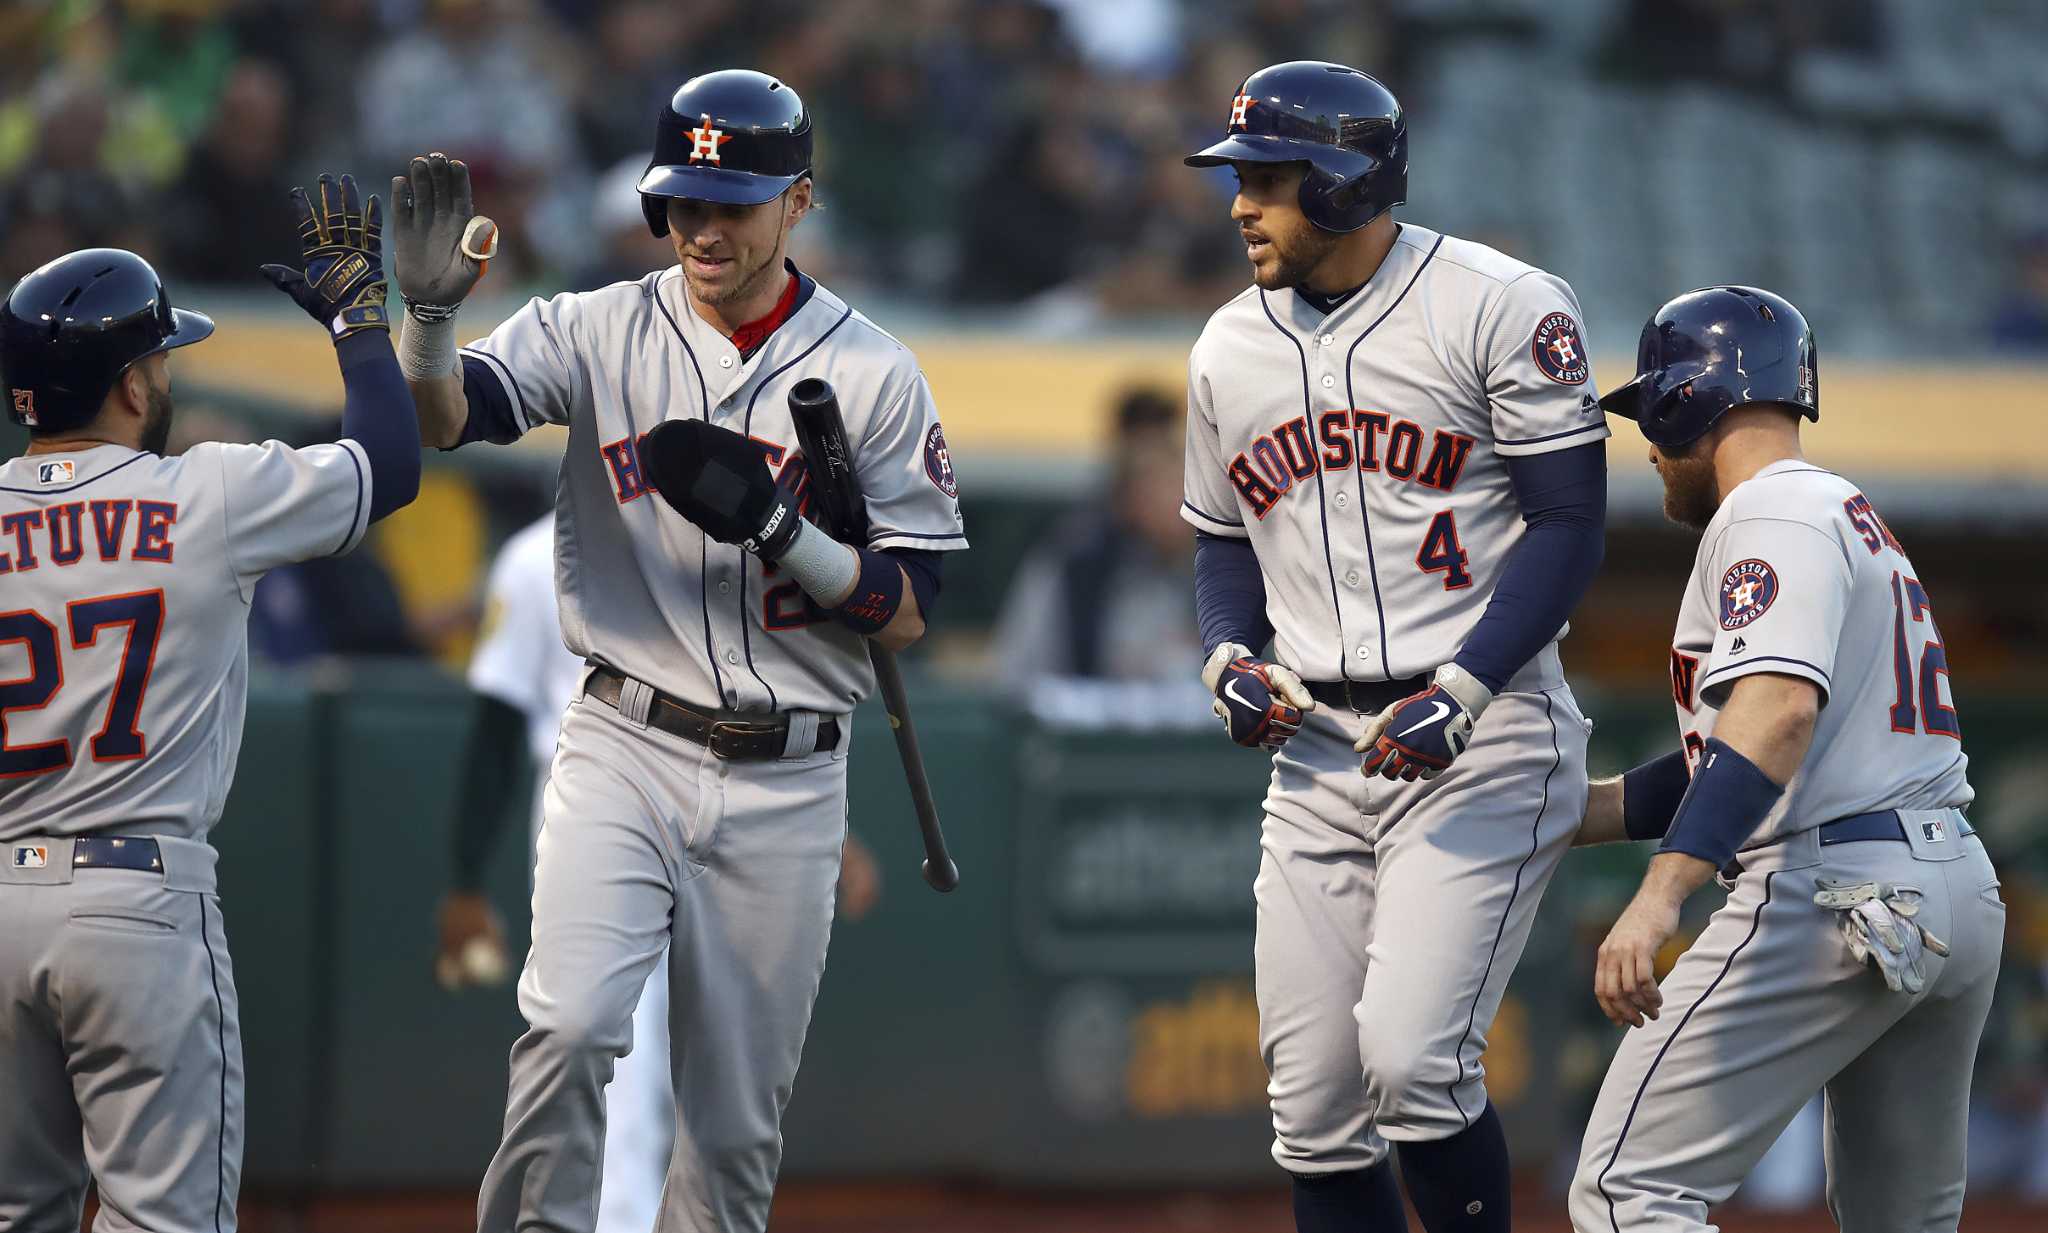 A crazy eight: Yuli Gurriel ties team RBI record as Astros rout